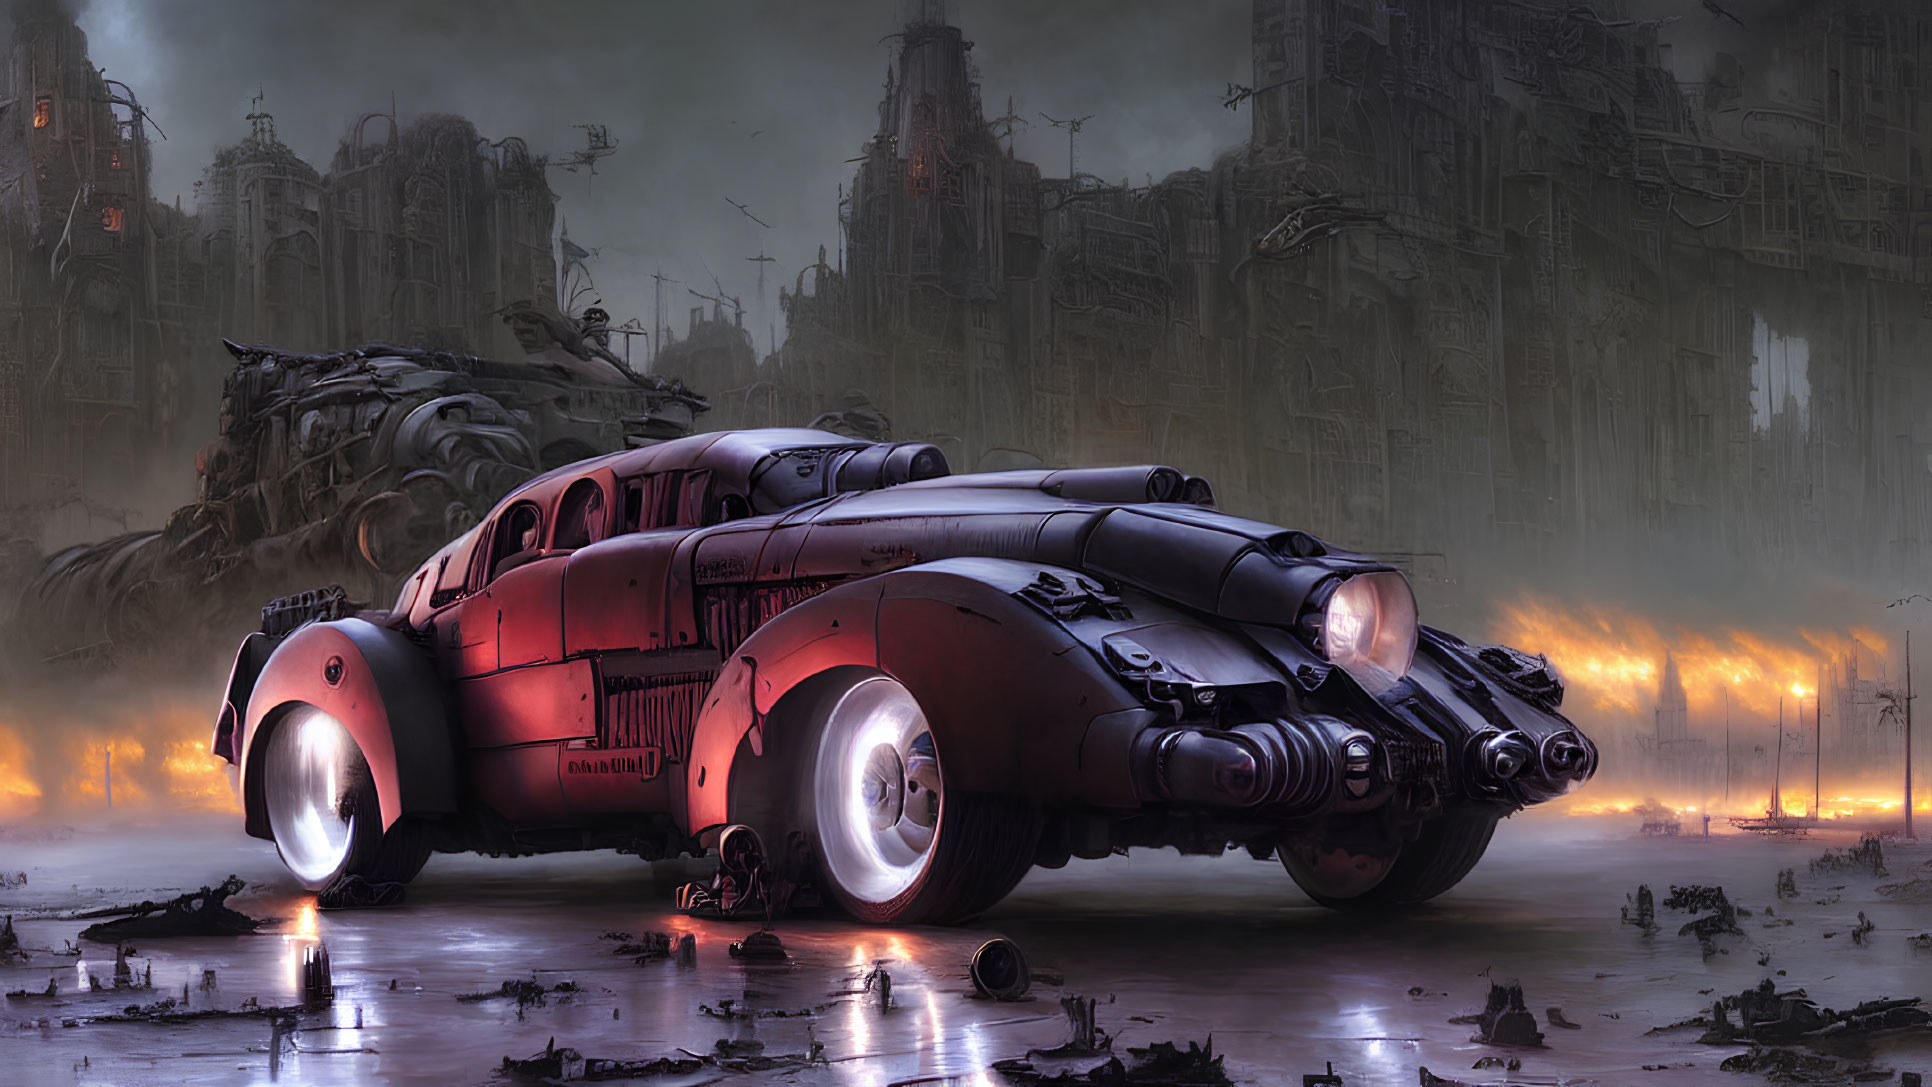 Futuristic red car in dystopian cityscape with large wheels